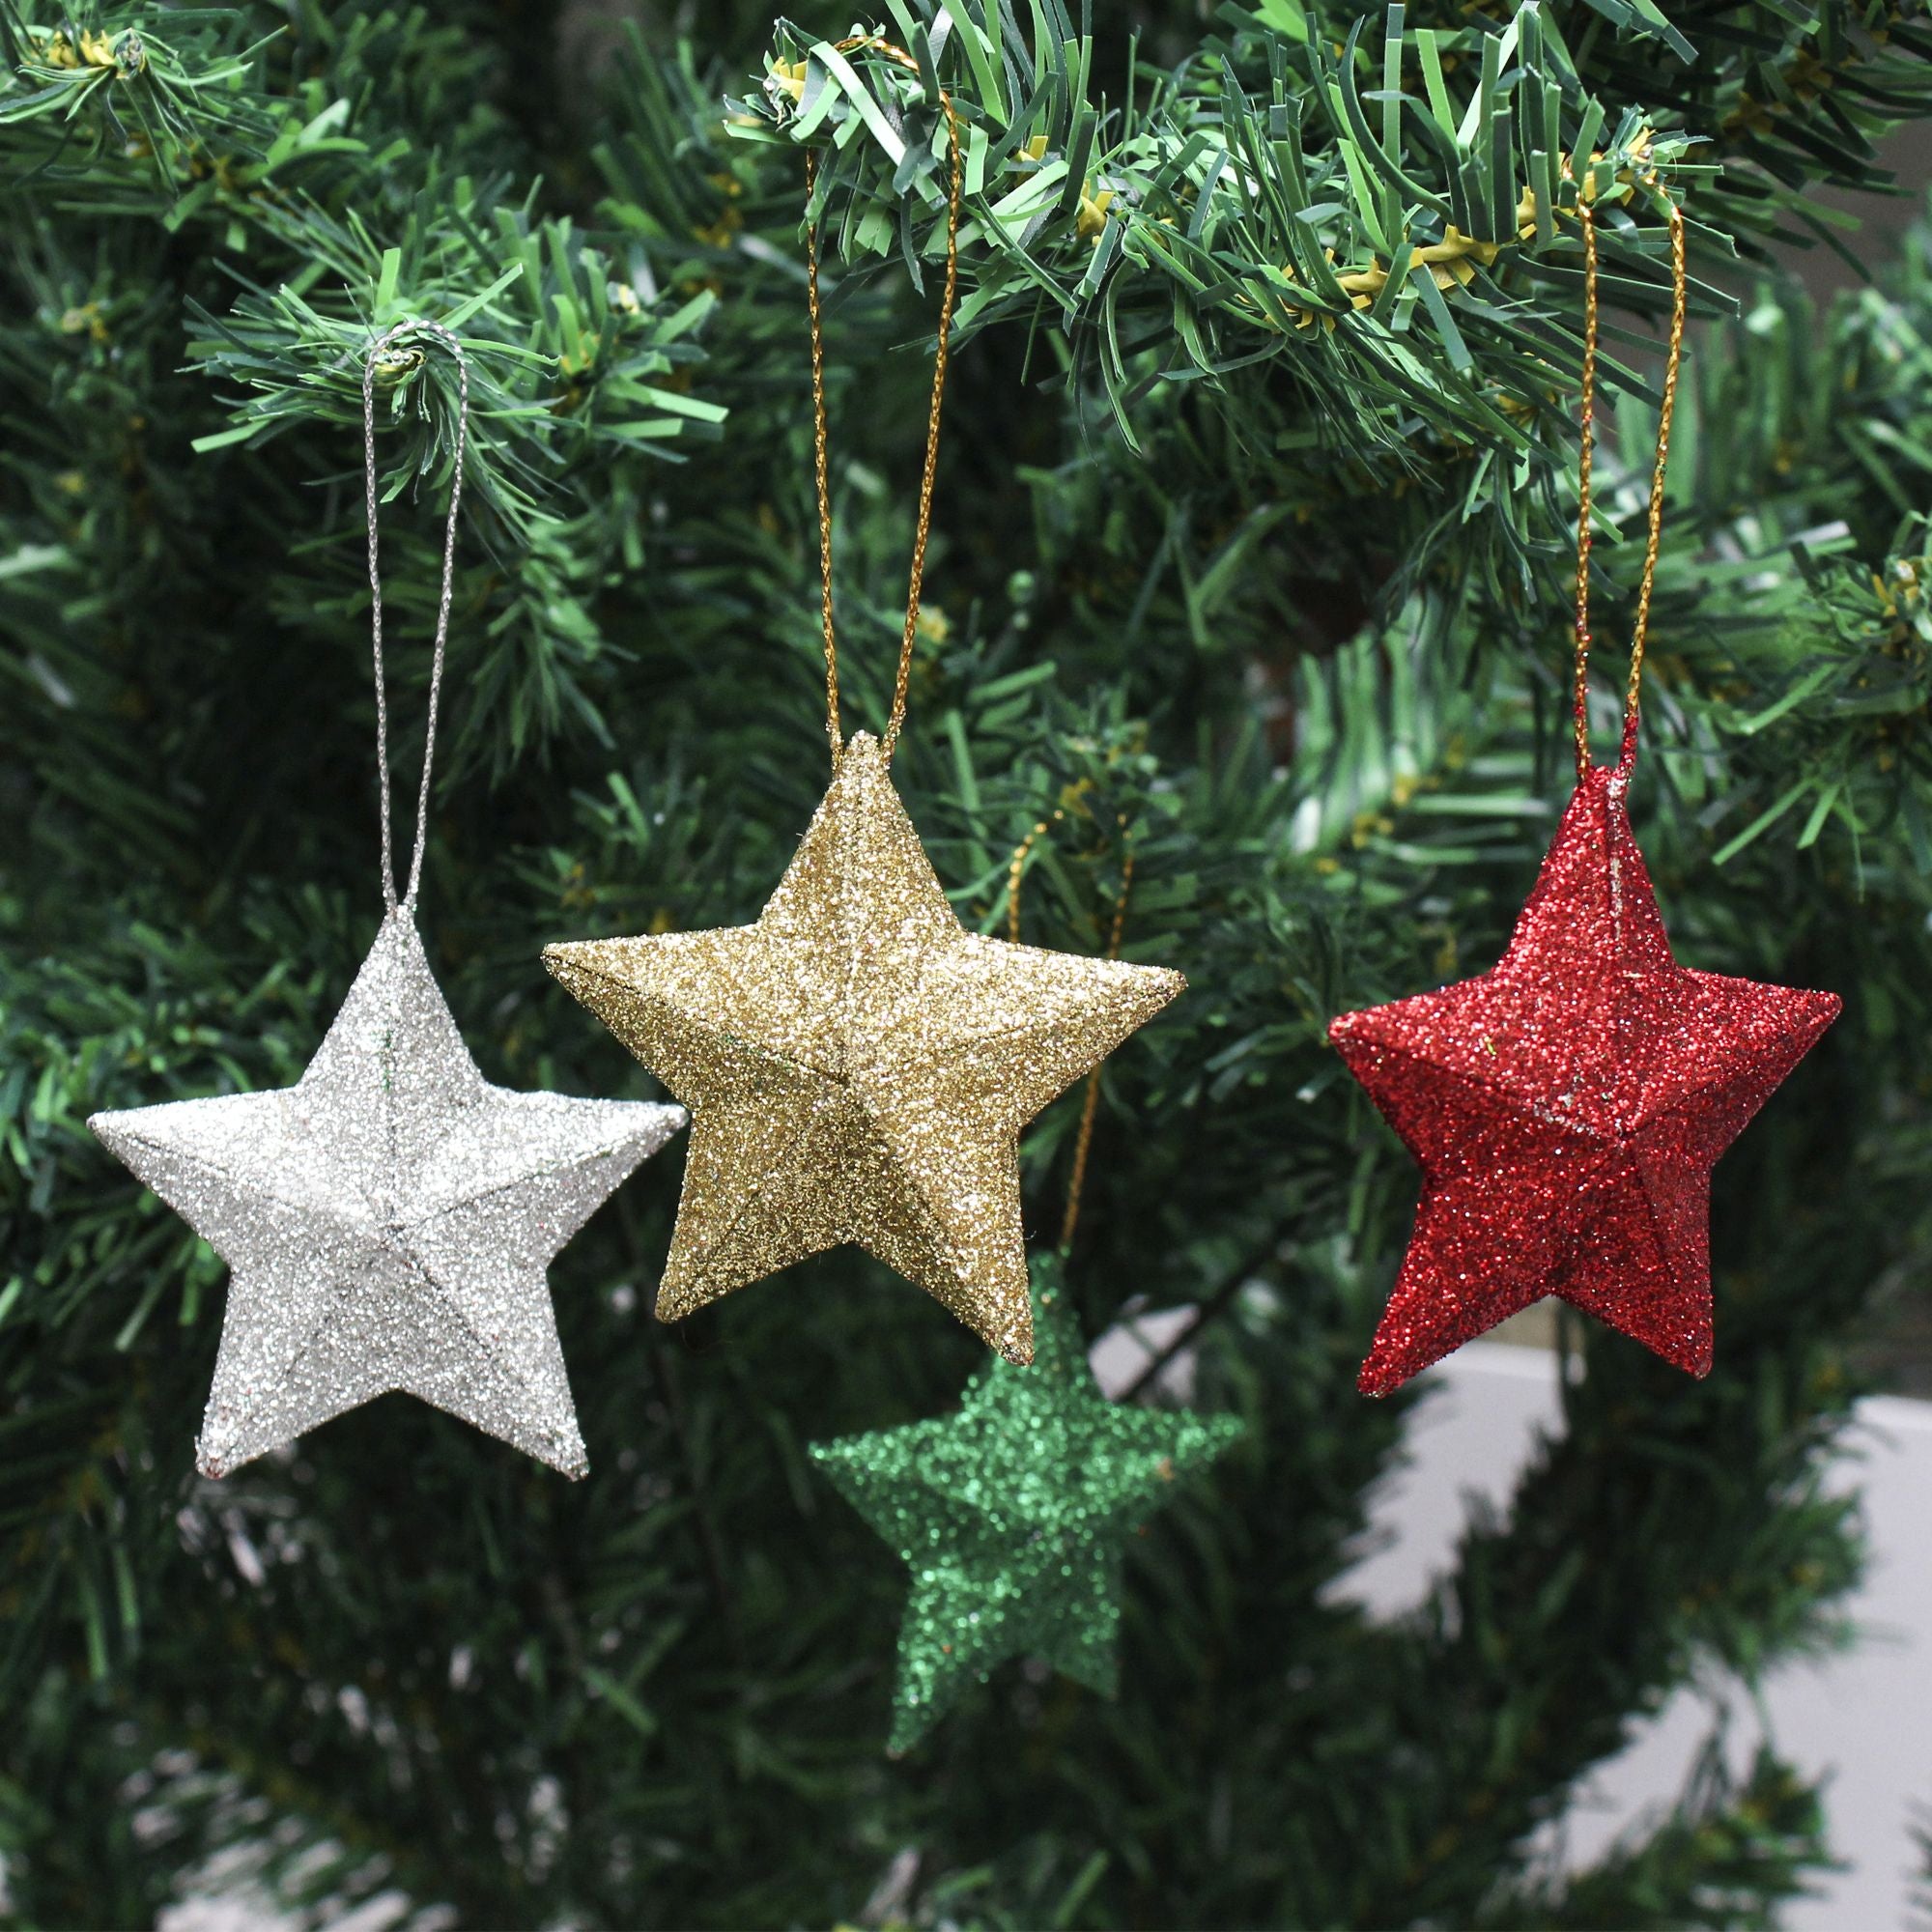 Handmade Christmas Ornaments - 3D Glitter Stars, 2.5inch, Assorted Colours - Gold, Red, Green, Silver, 6pc